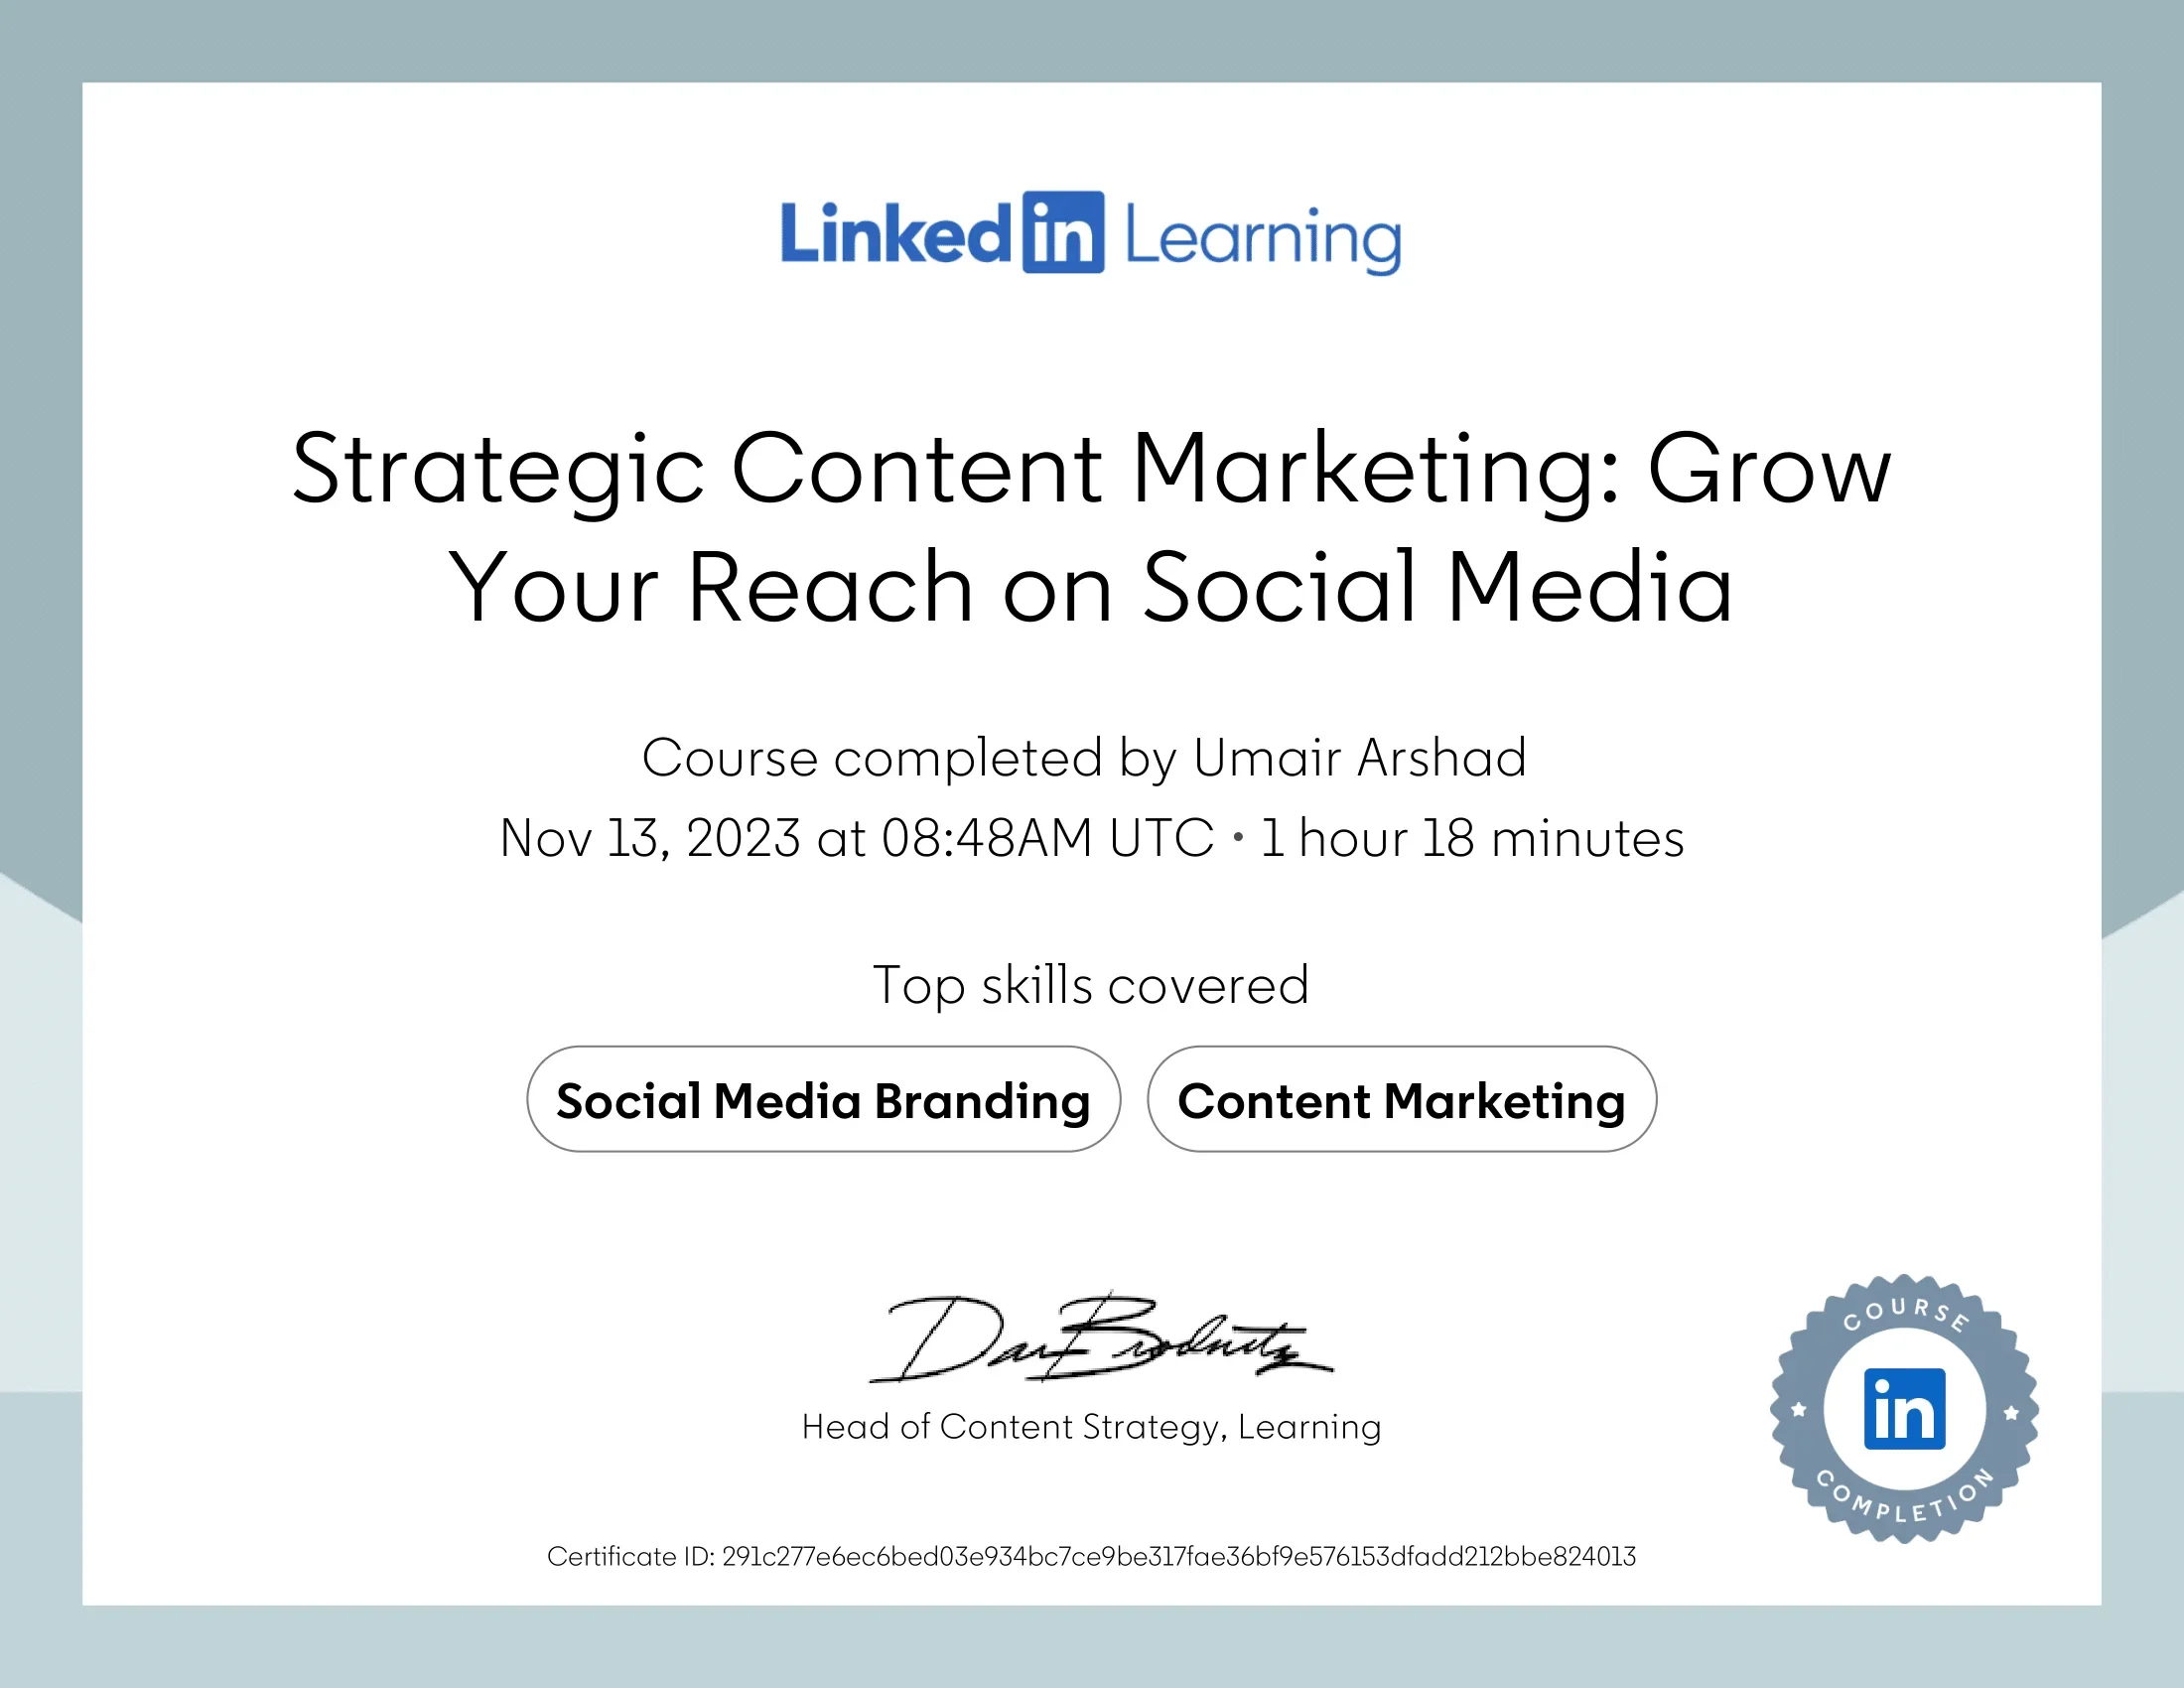 CertificateOfCompletion_Strategic-Content-Marketing-Grow-Your-Reach-on-Social-Media-1